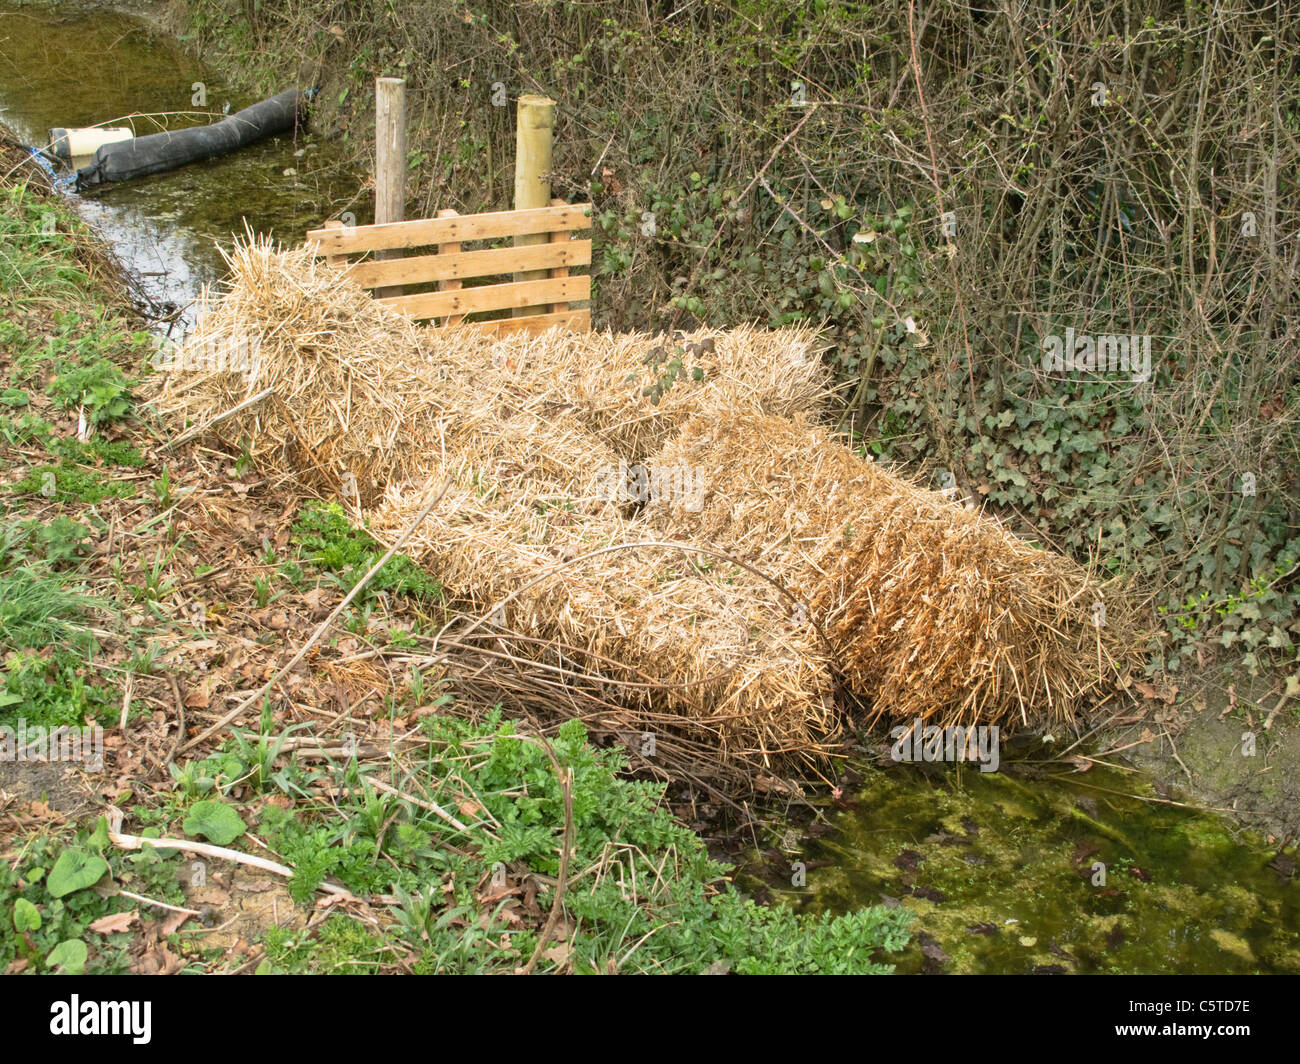 Floating containment barrier and bales of straw being used to clean up diesel spillage in water course. Stock Photo